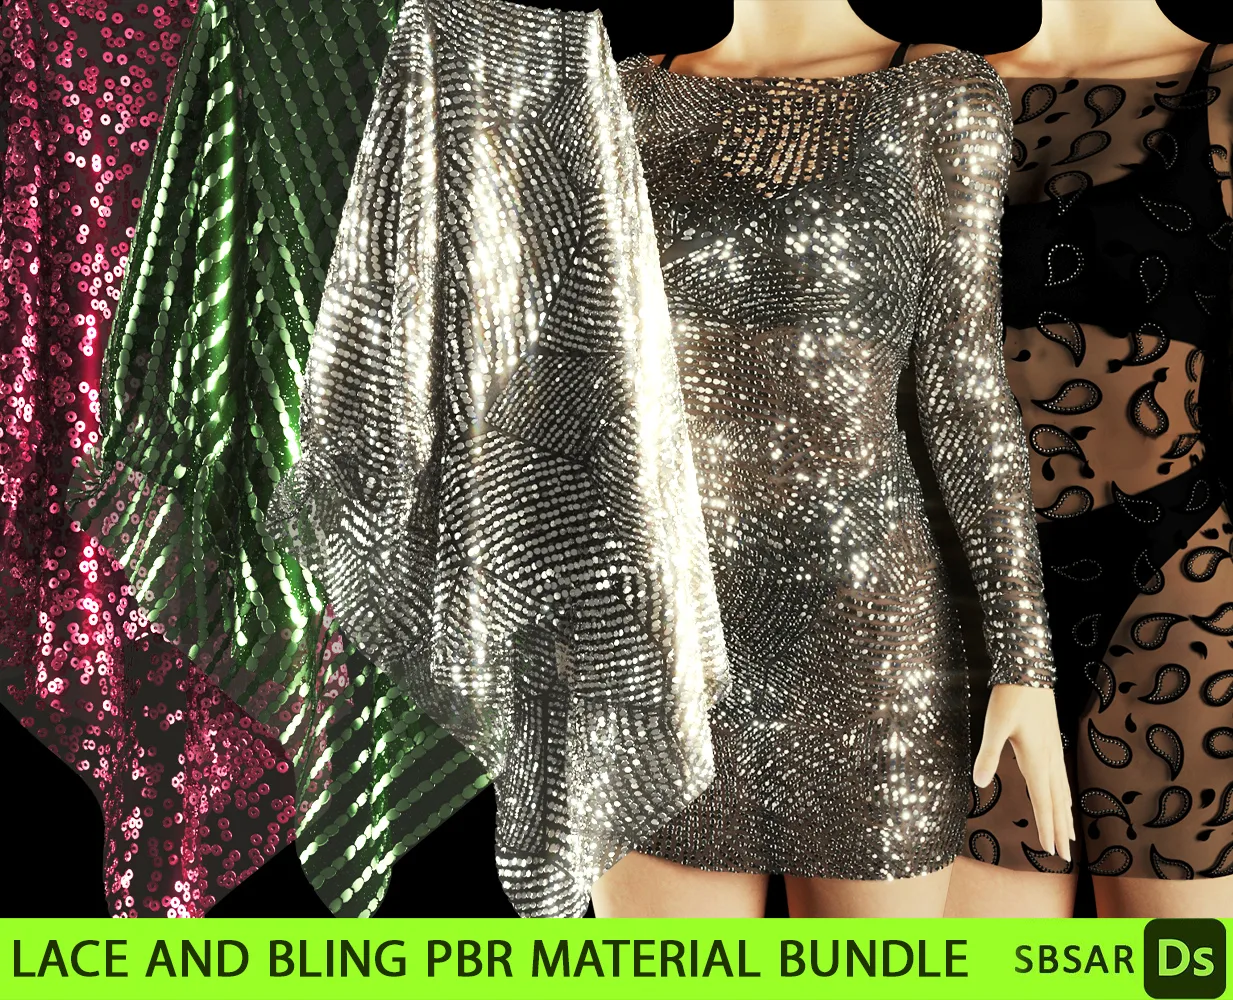 Lace and bling fabric PBR material bundle (SBSAR + 4K textures)